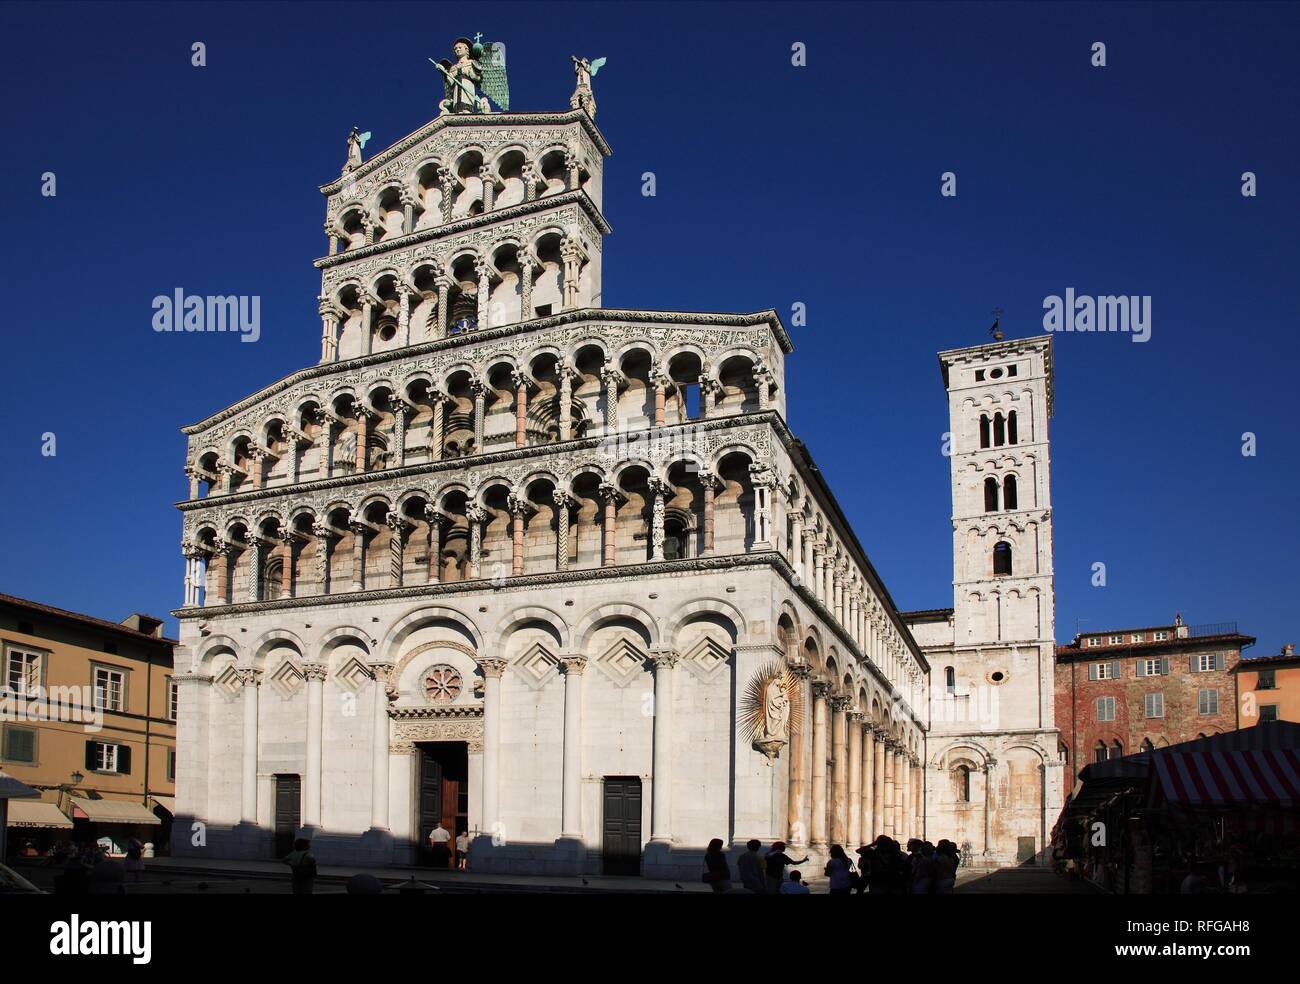 San Michele in Foro, Lucca, Toscane, Italie Banque D'Images